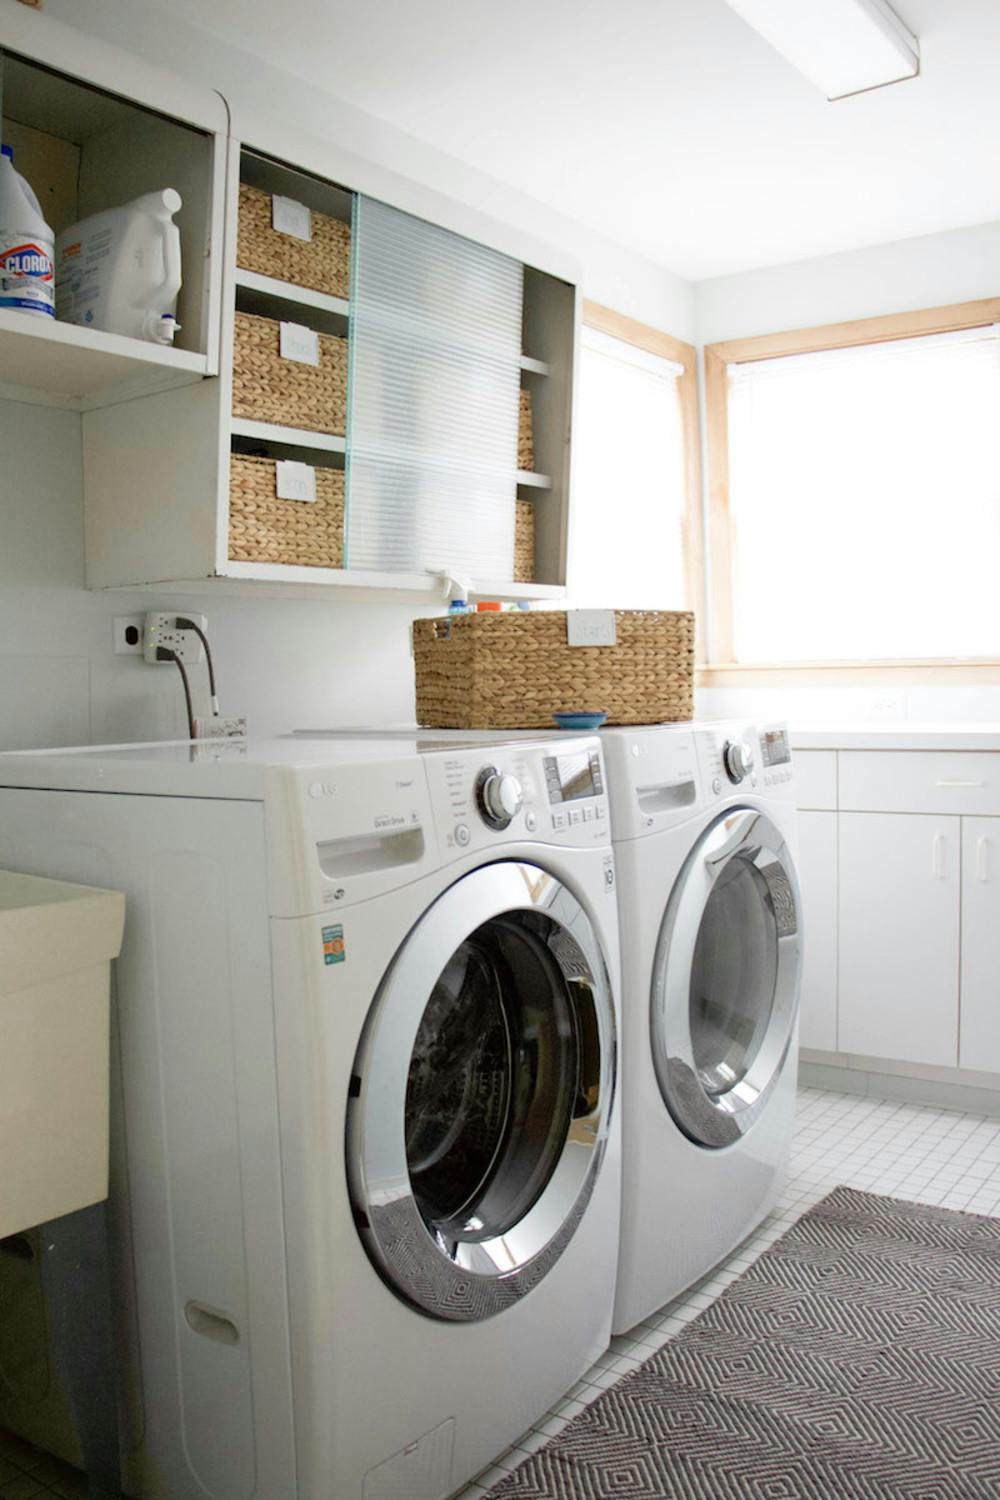 How To Organize Your Laundry Room | Container Stories